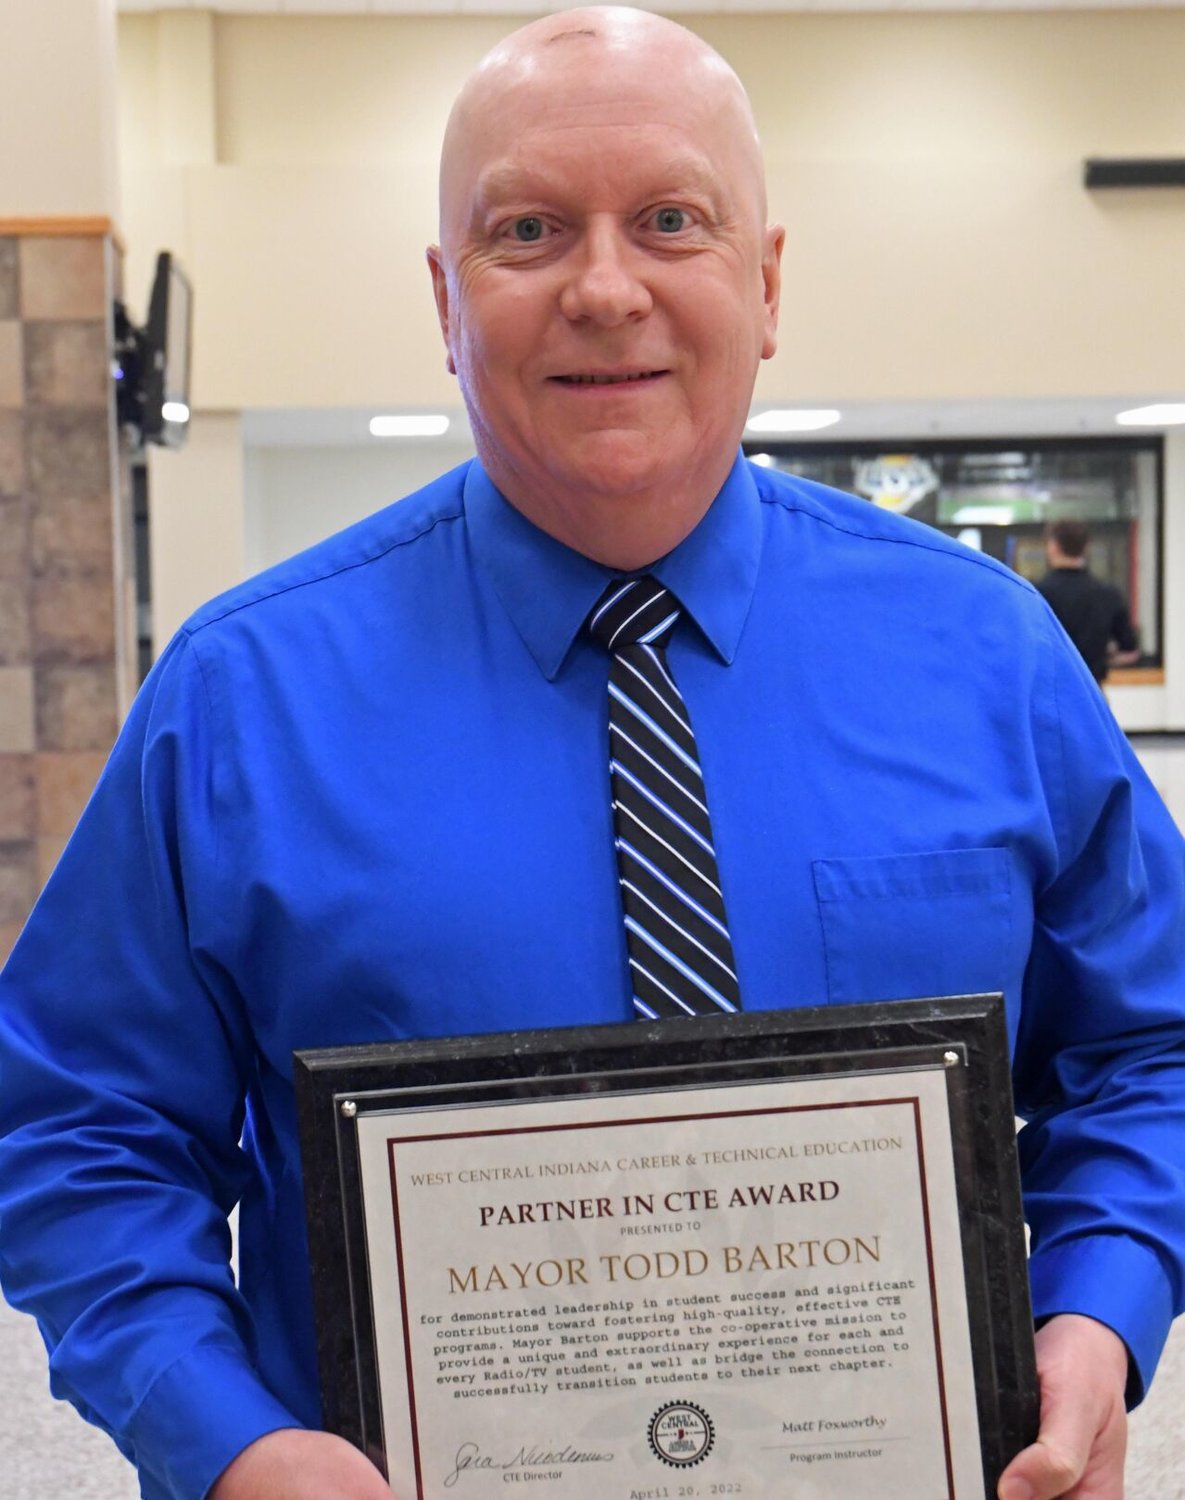 Crawfordsville Mayor Todd Barton received the Partners in Career and Technical Education Award for leadership in the creation of a new radio and TV studio for the community and students.